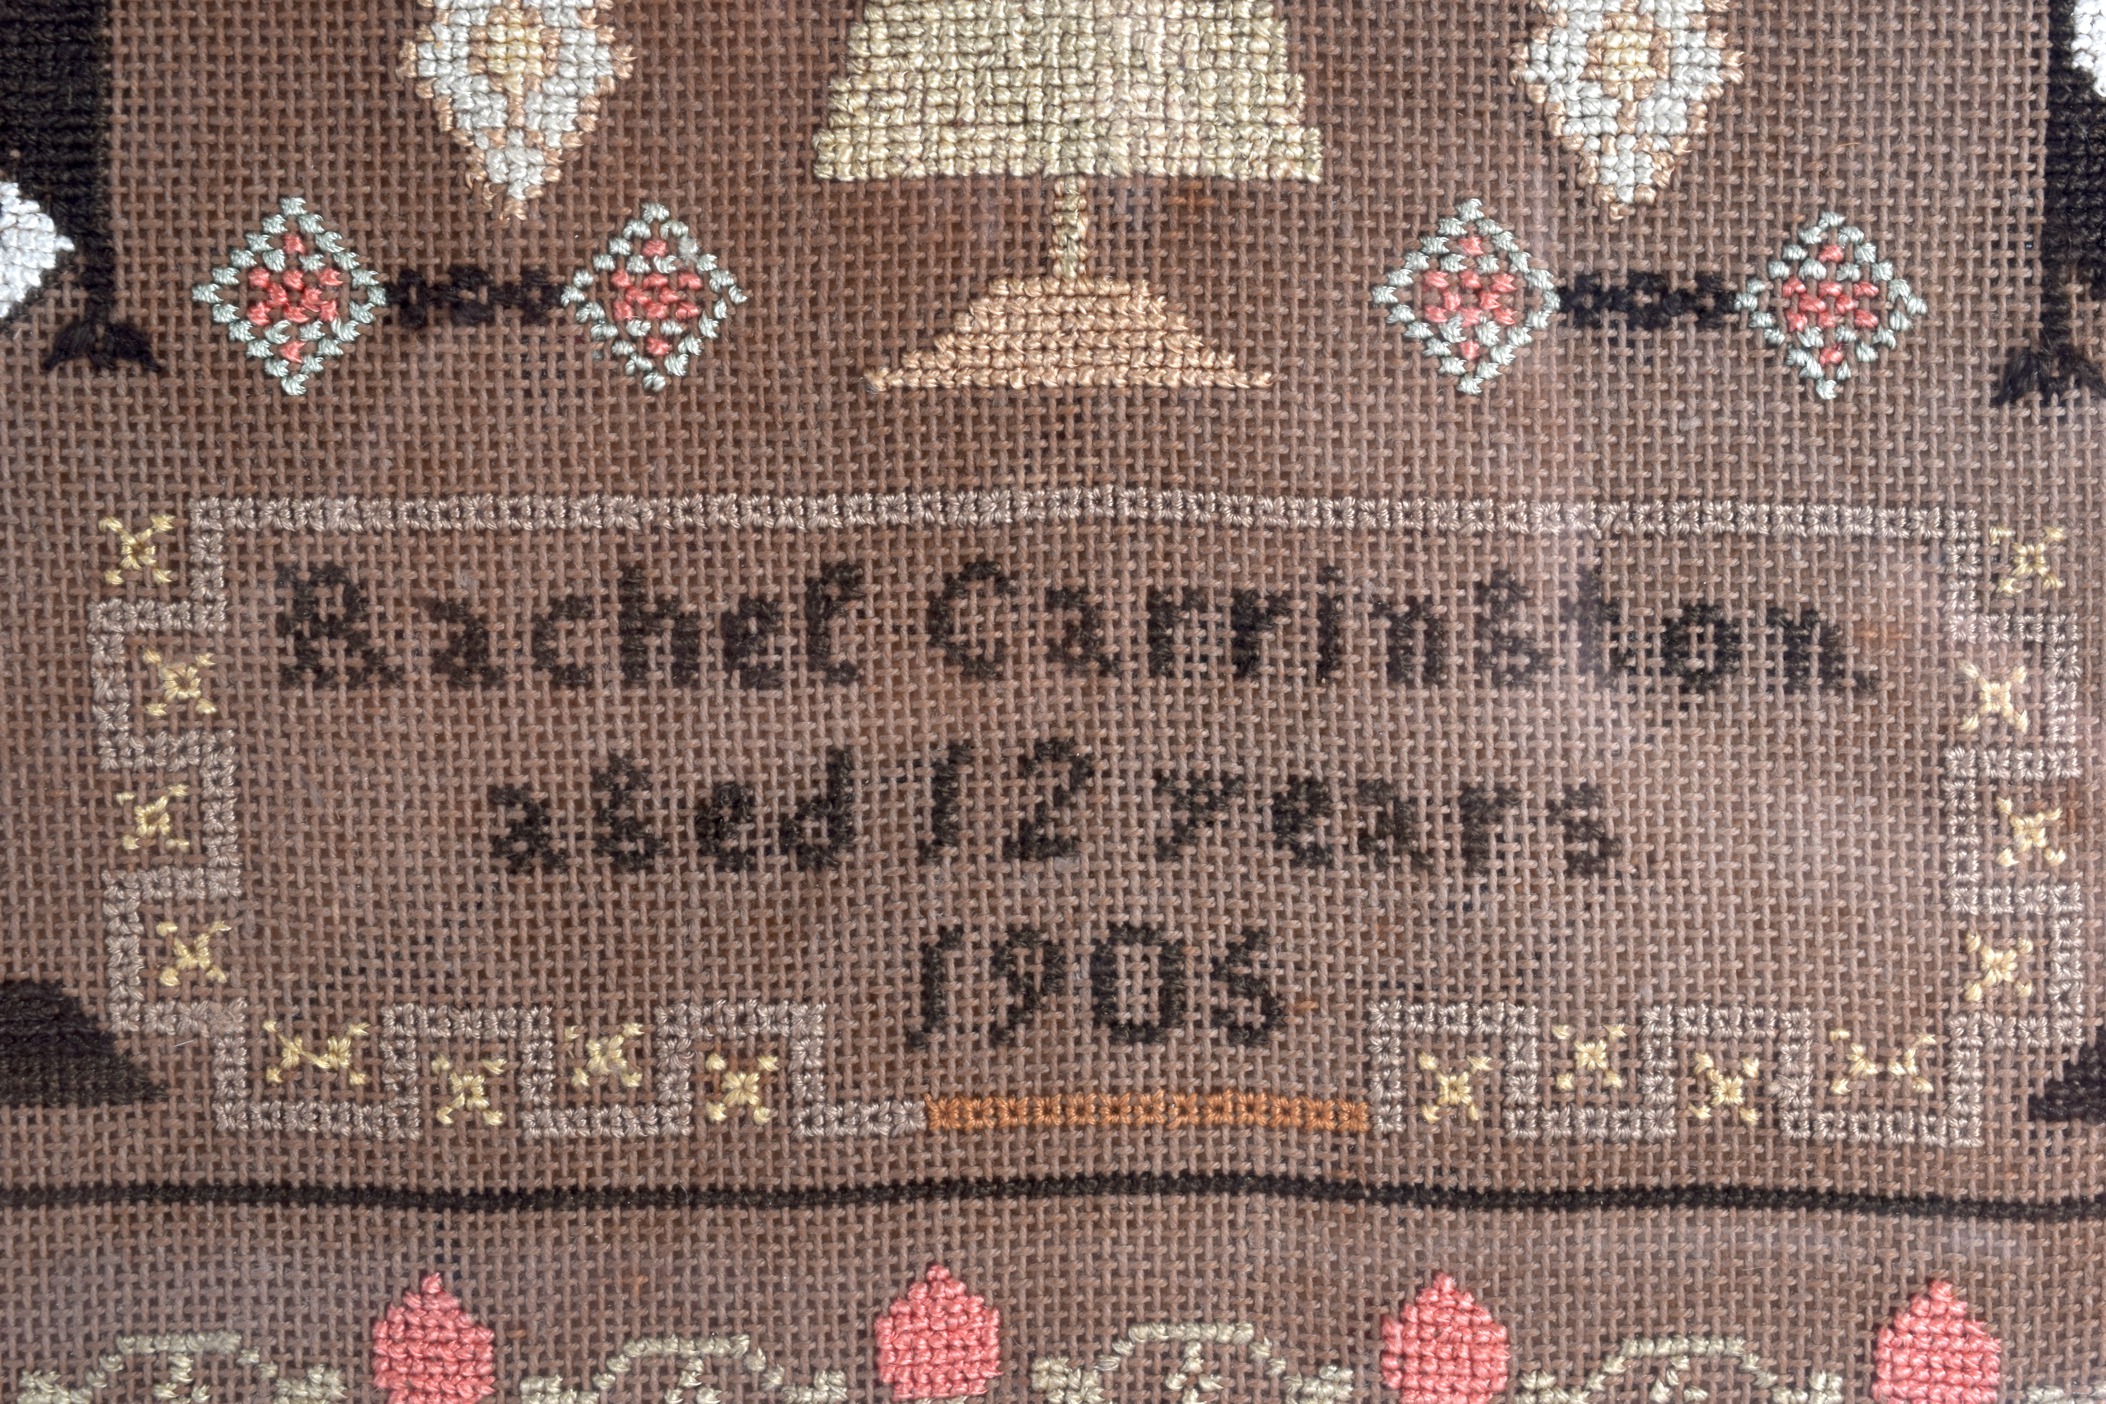 AN EARLY 20TH CENTURY FRAMED EMBROIDERED SAMPLER by Rachel Carrington Aged 12 years 1905. Sampler 39 - Image 2 of 3